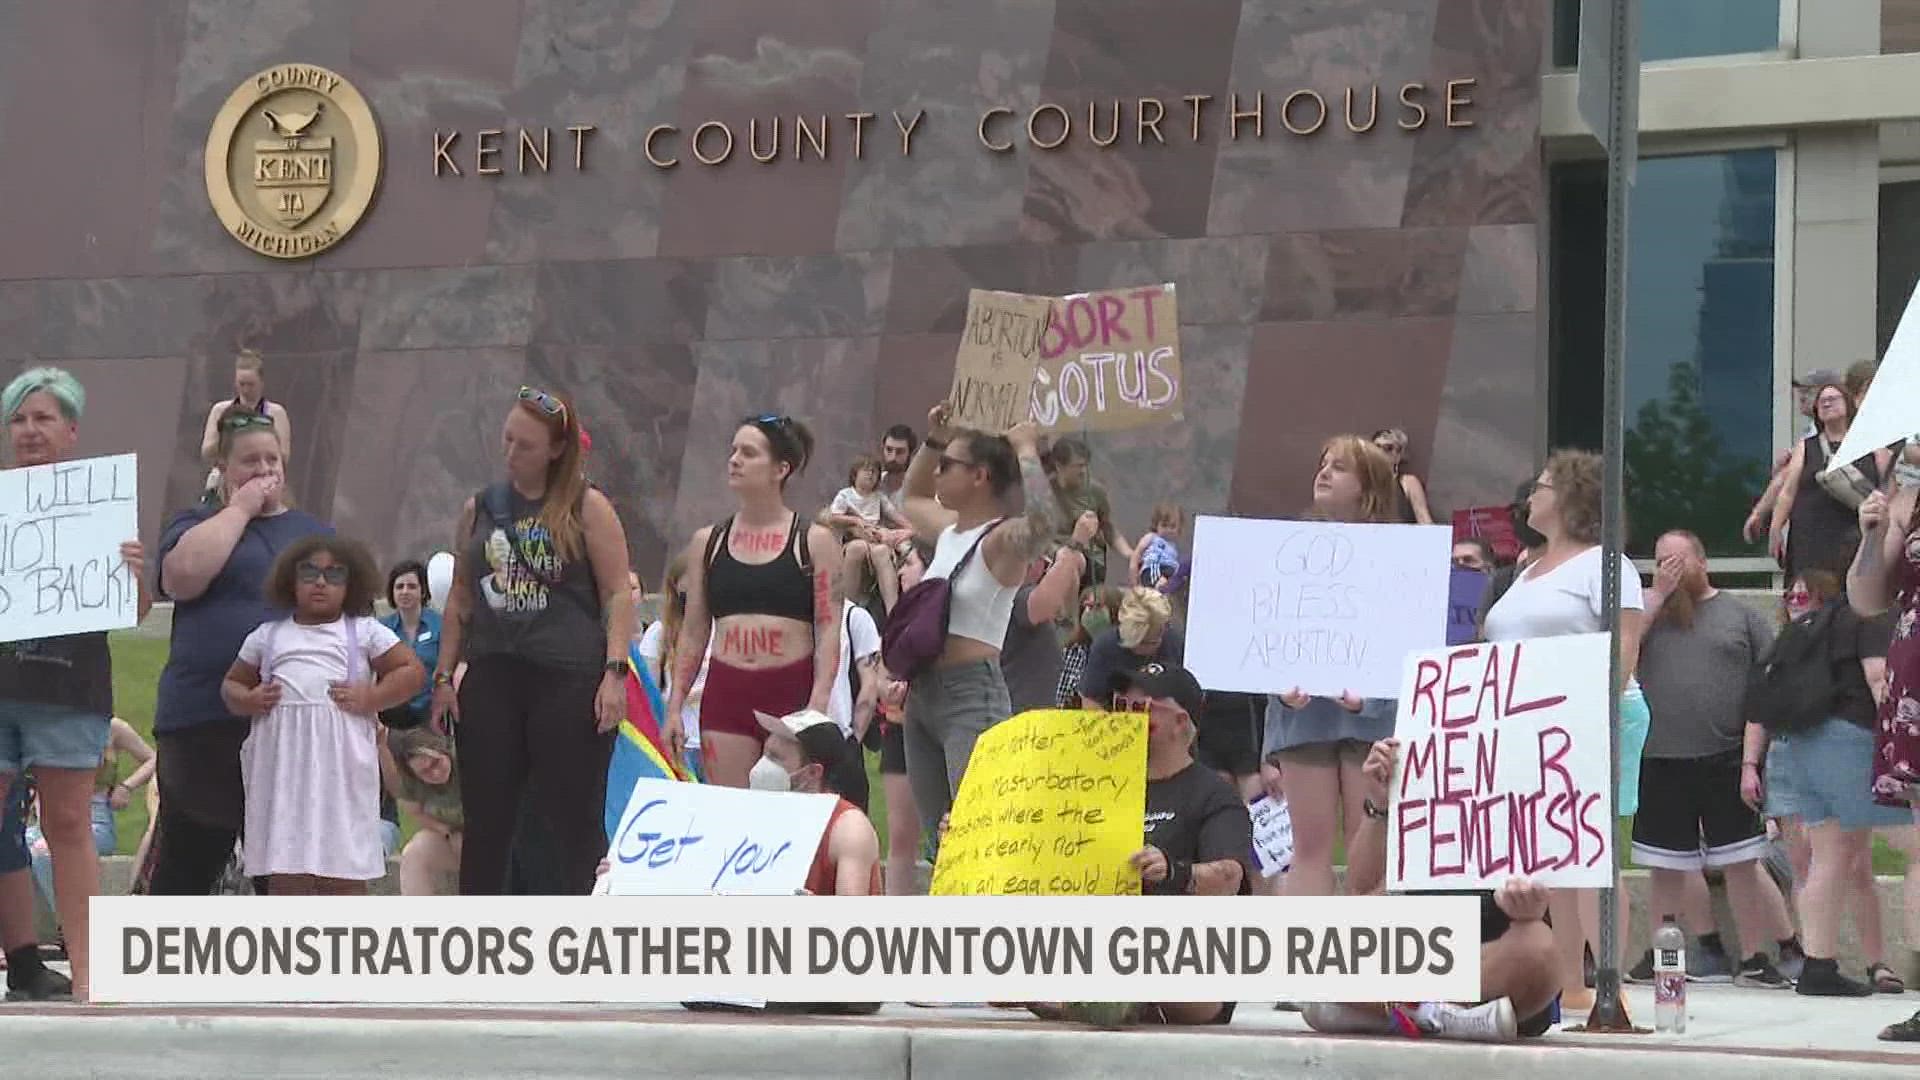 Hundreds gathered outside the Kent County Courthouse to protest the Supreme Court's decision to overturn Roe v. Wade.